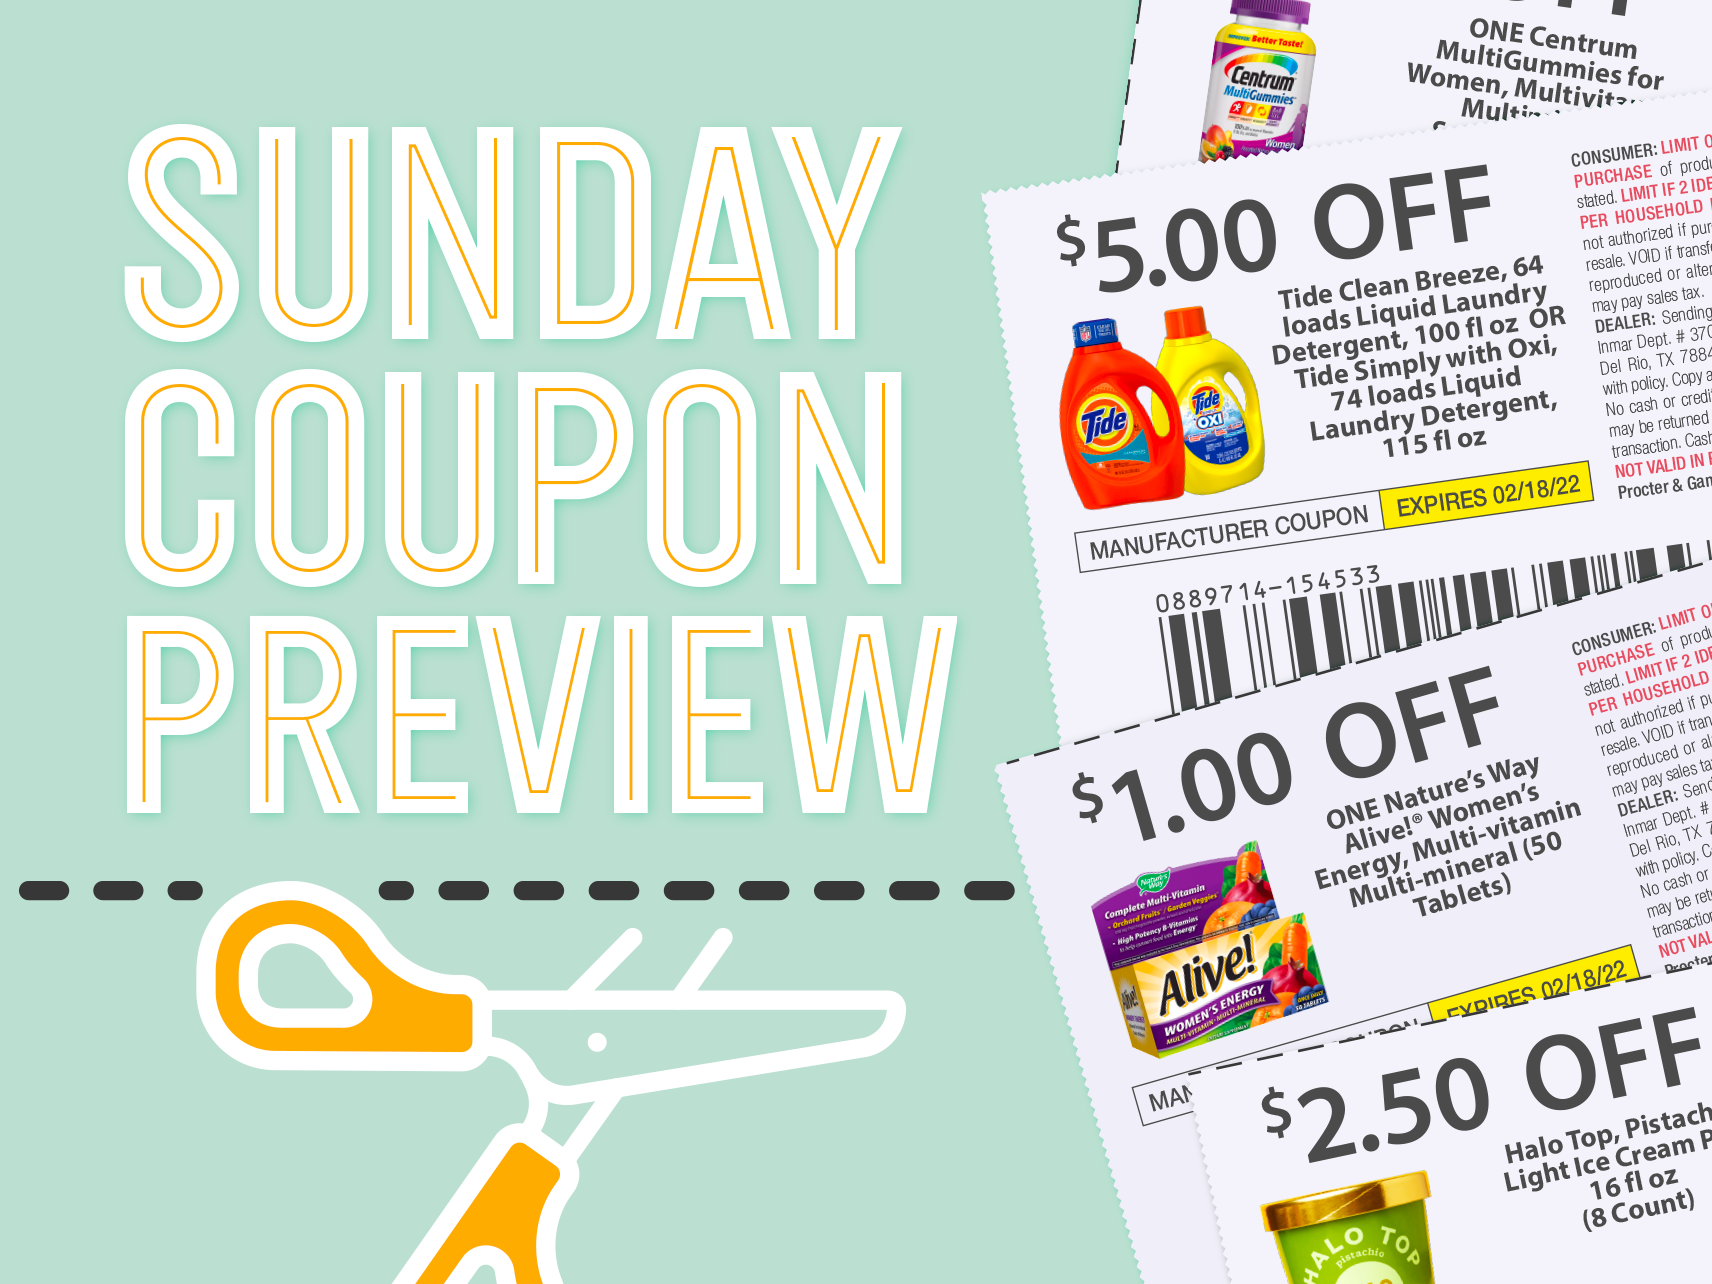 Sunday Coupon Preview For 10/23 – One Insert